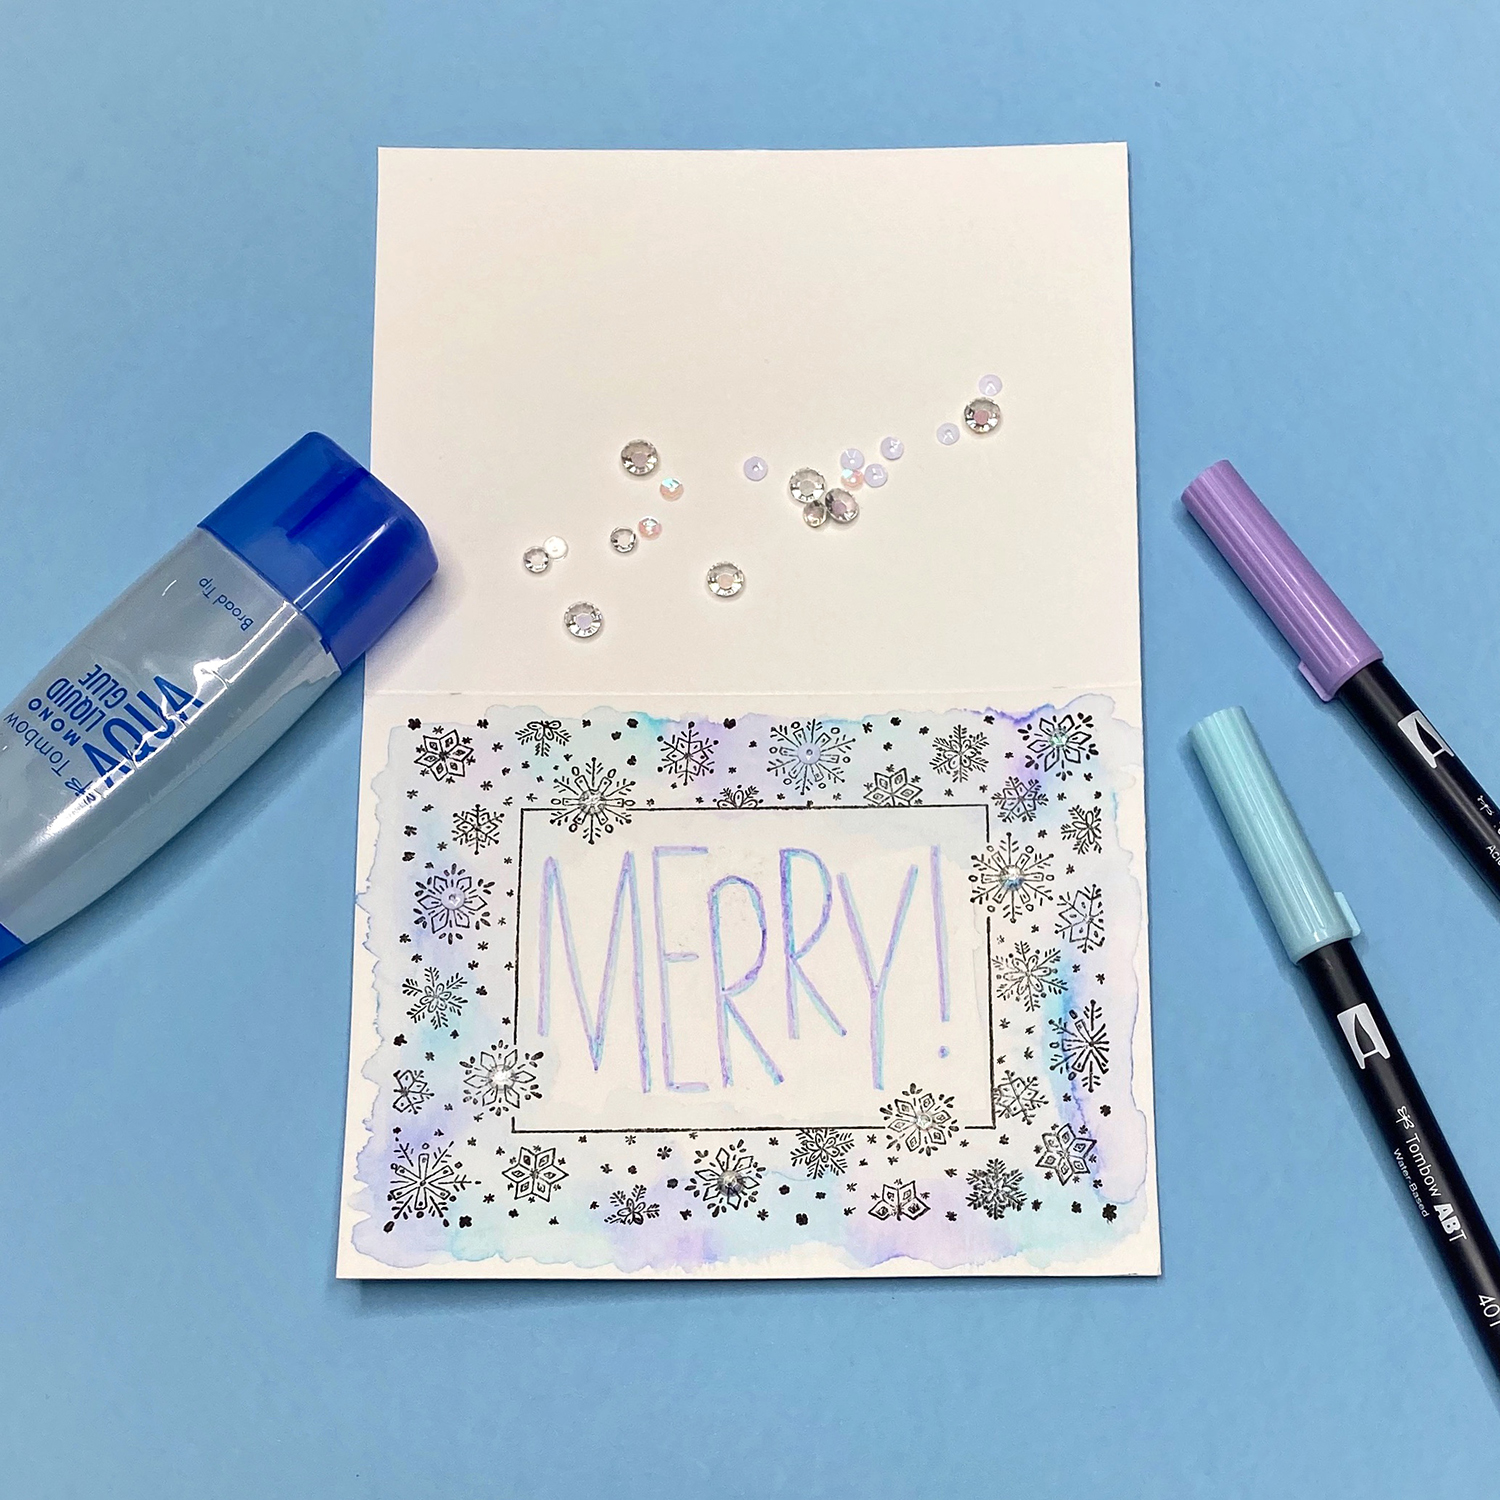 Easy Snowflake Cards with Tombow and Whimsy Stamps by Jessica Mack on behalf of Tombow